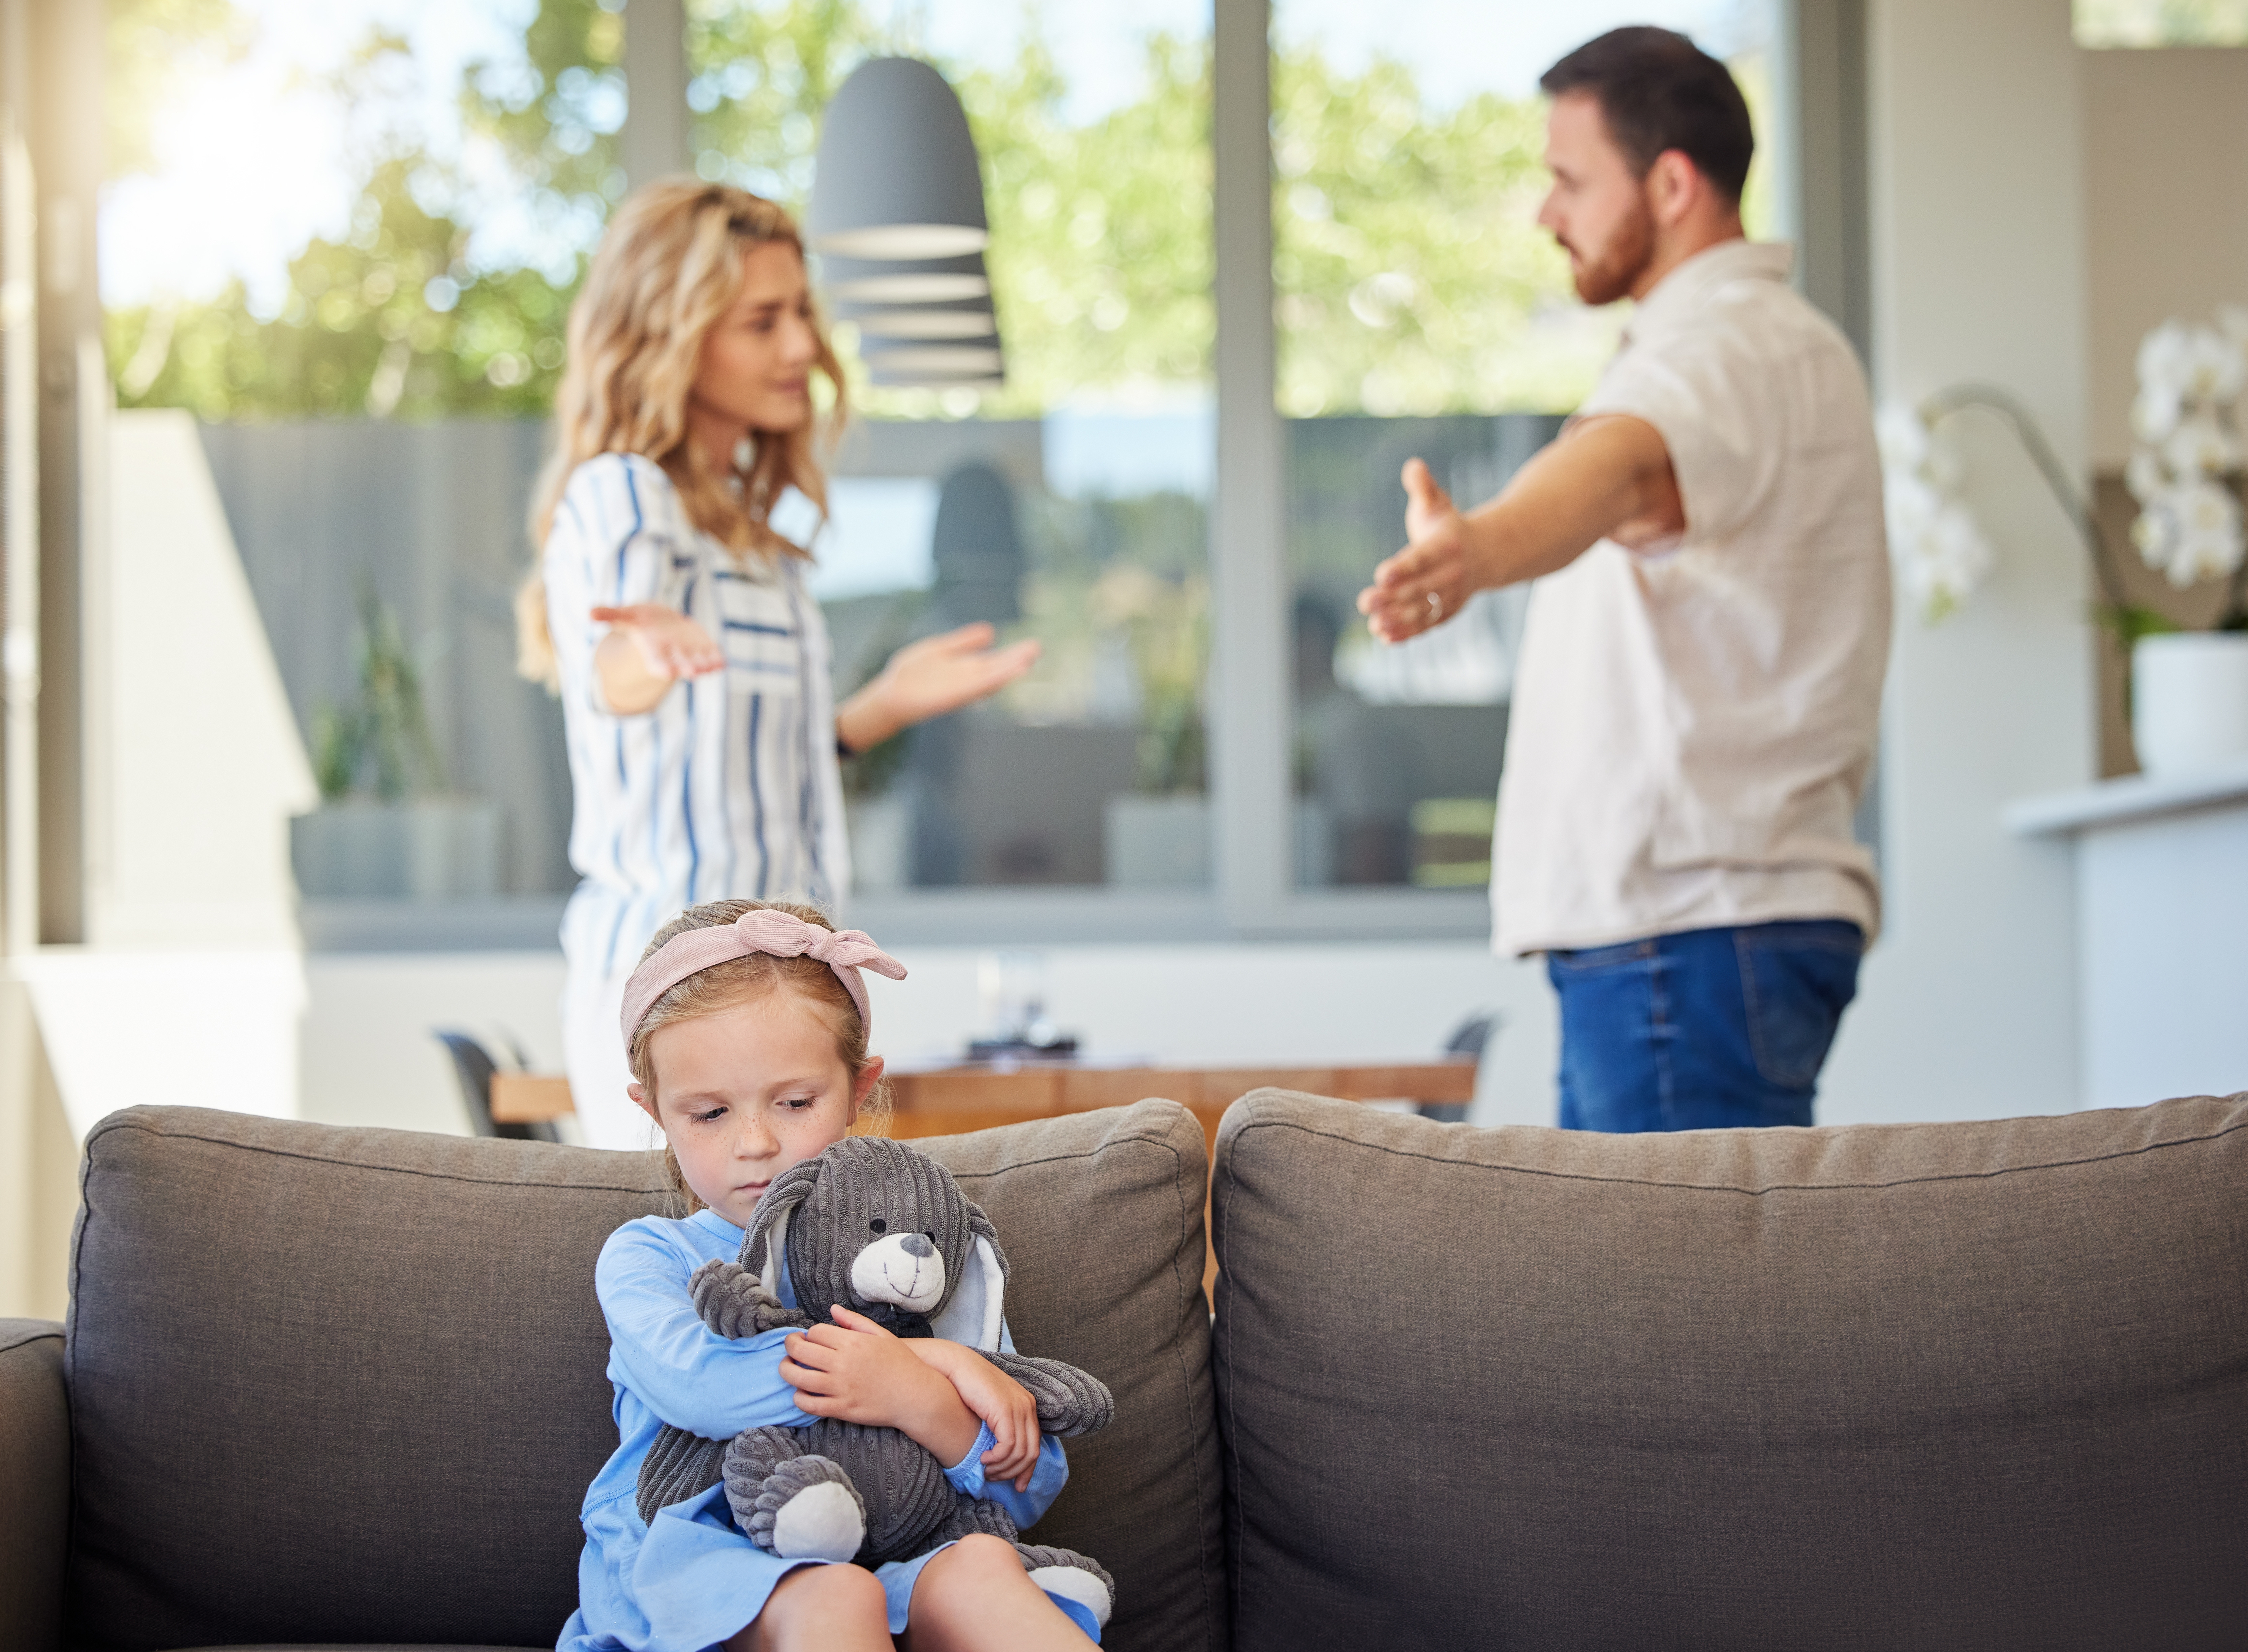 A couple quarreling in the background with their little girl sitting quietly on the sofa | Source: Shutterstock